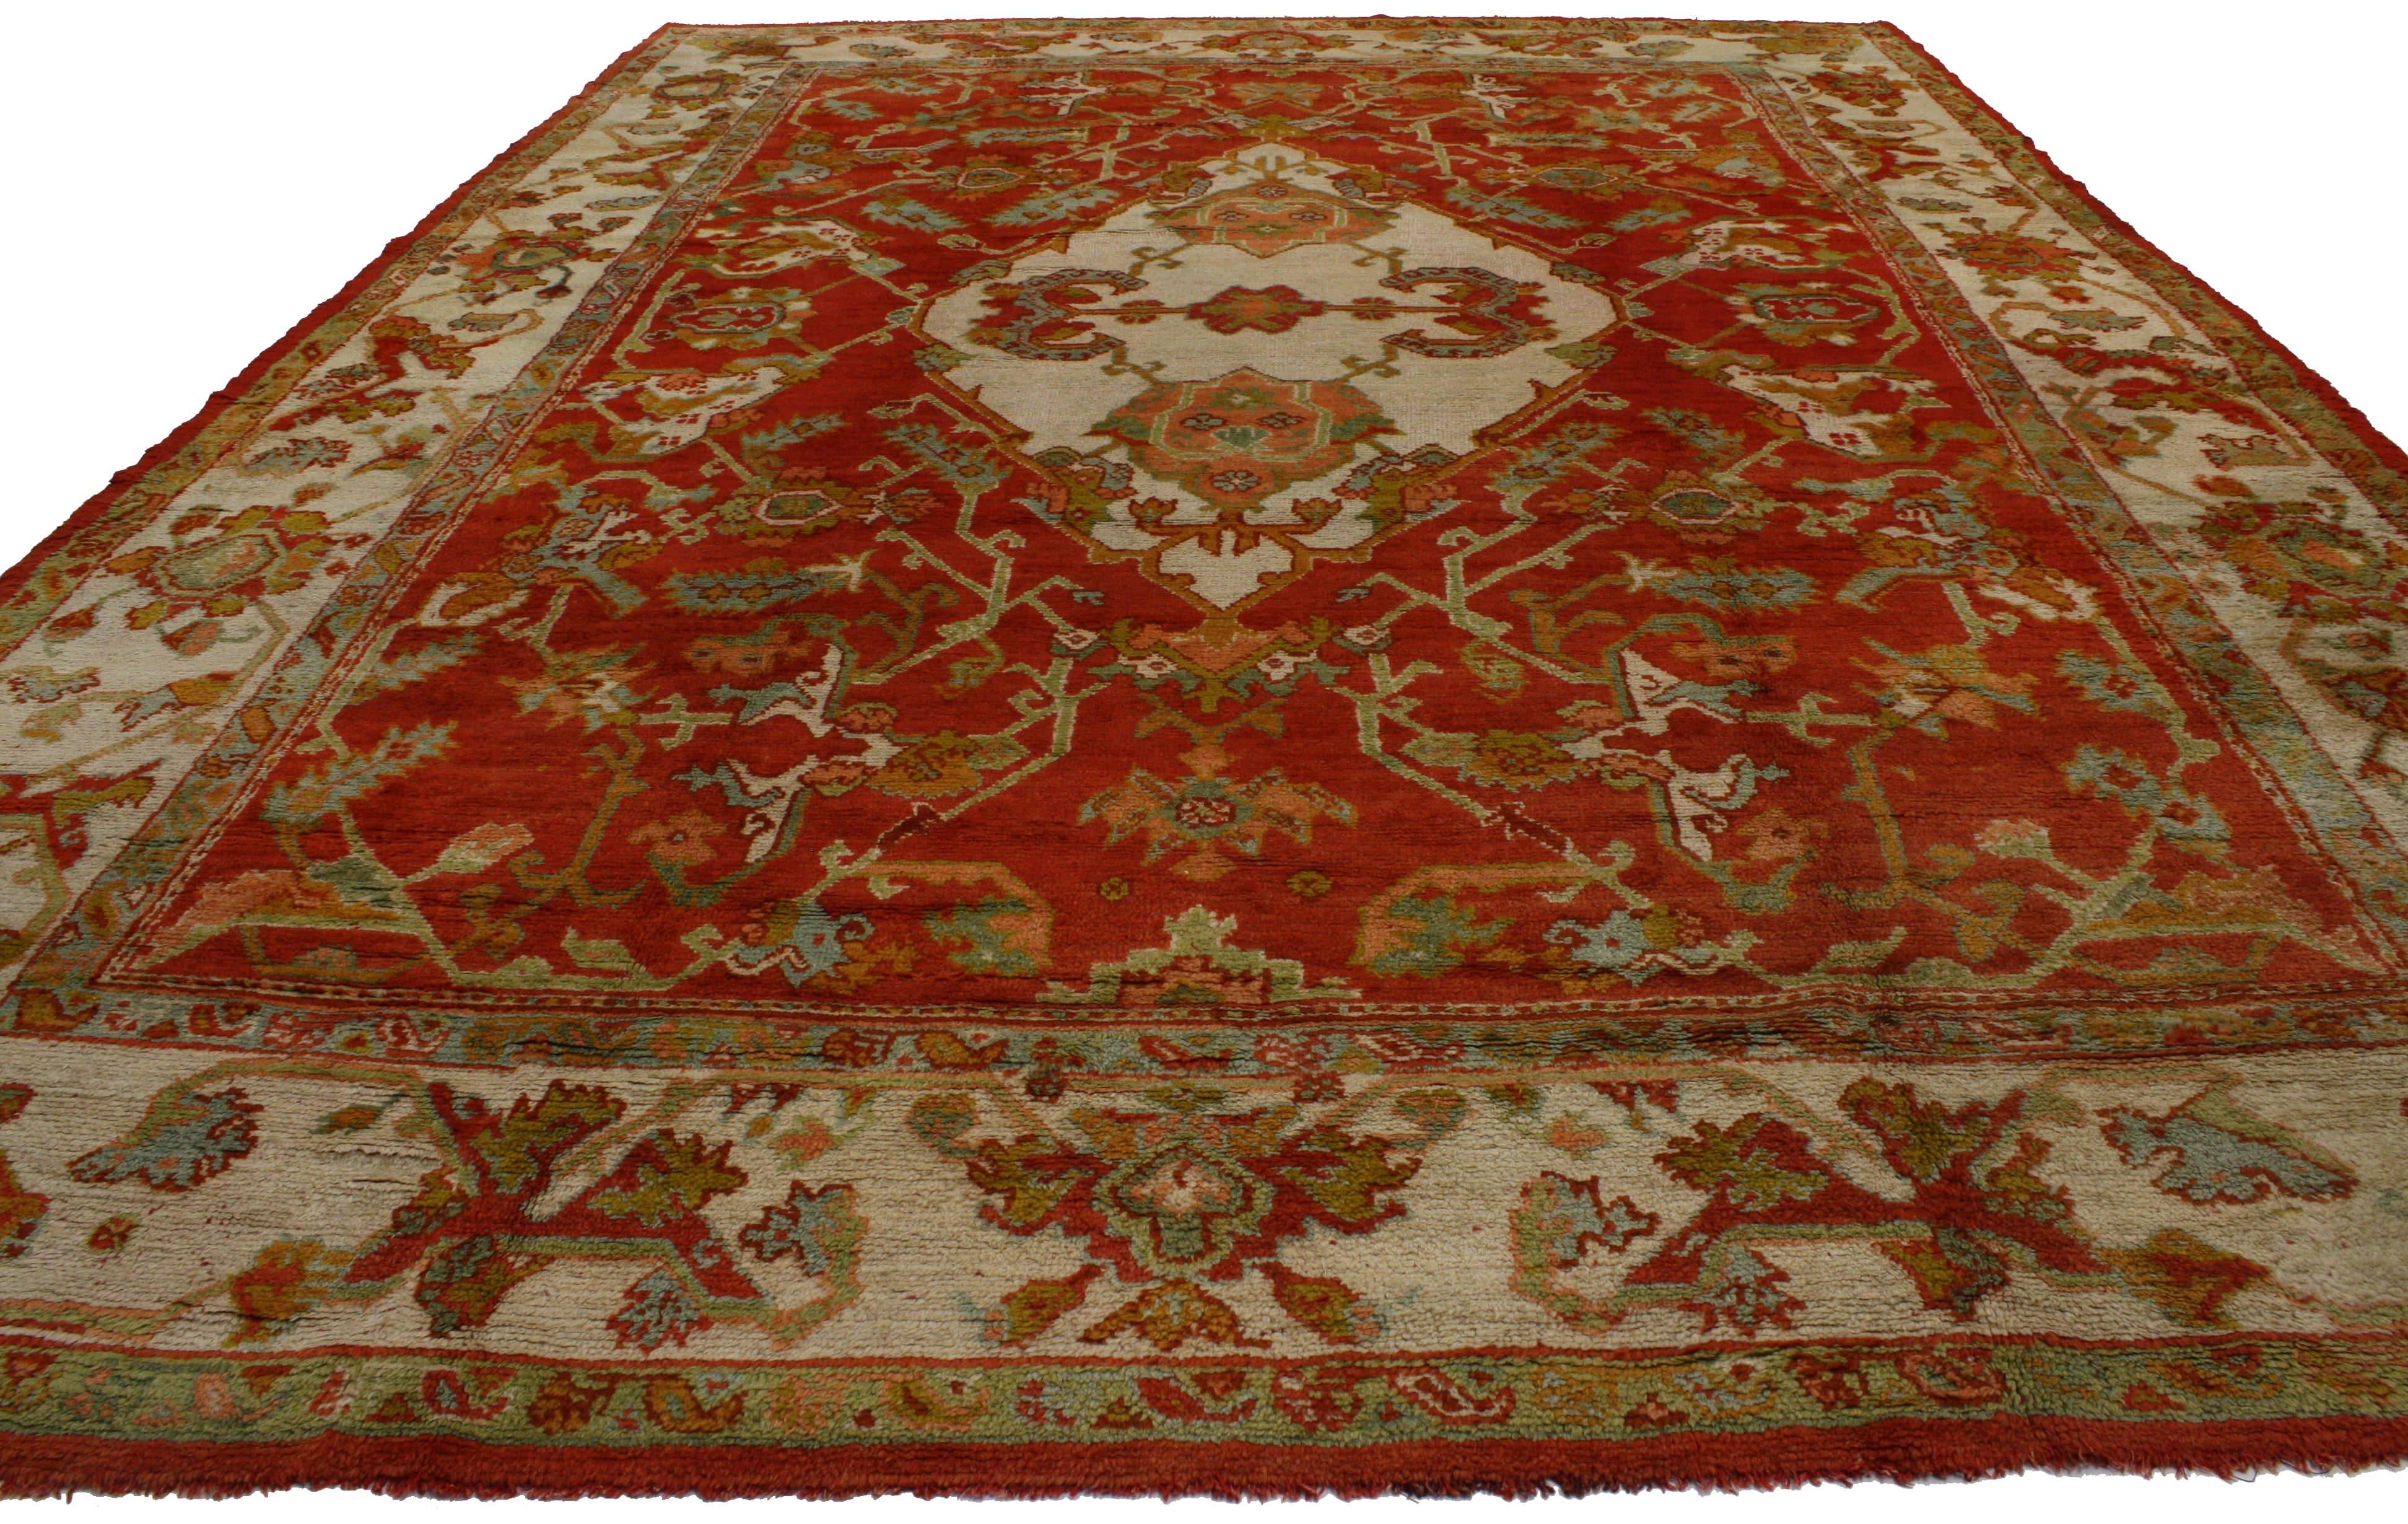 76656 Antique Turkish Oushak Rug with Traditional Modern Style. This hand-knotted wool antique Turkish Oushak rug is made with vibrant and festive tones. The presence of deep crimson red, light teal blue, spring green and cream colors come together